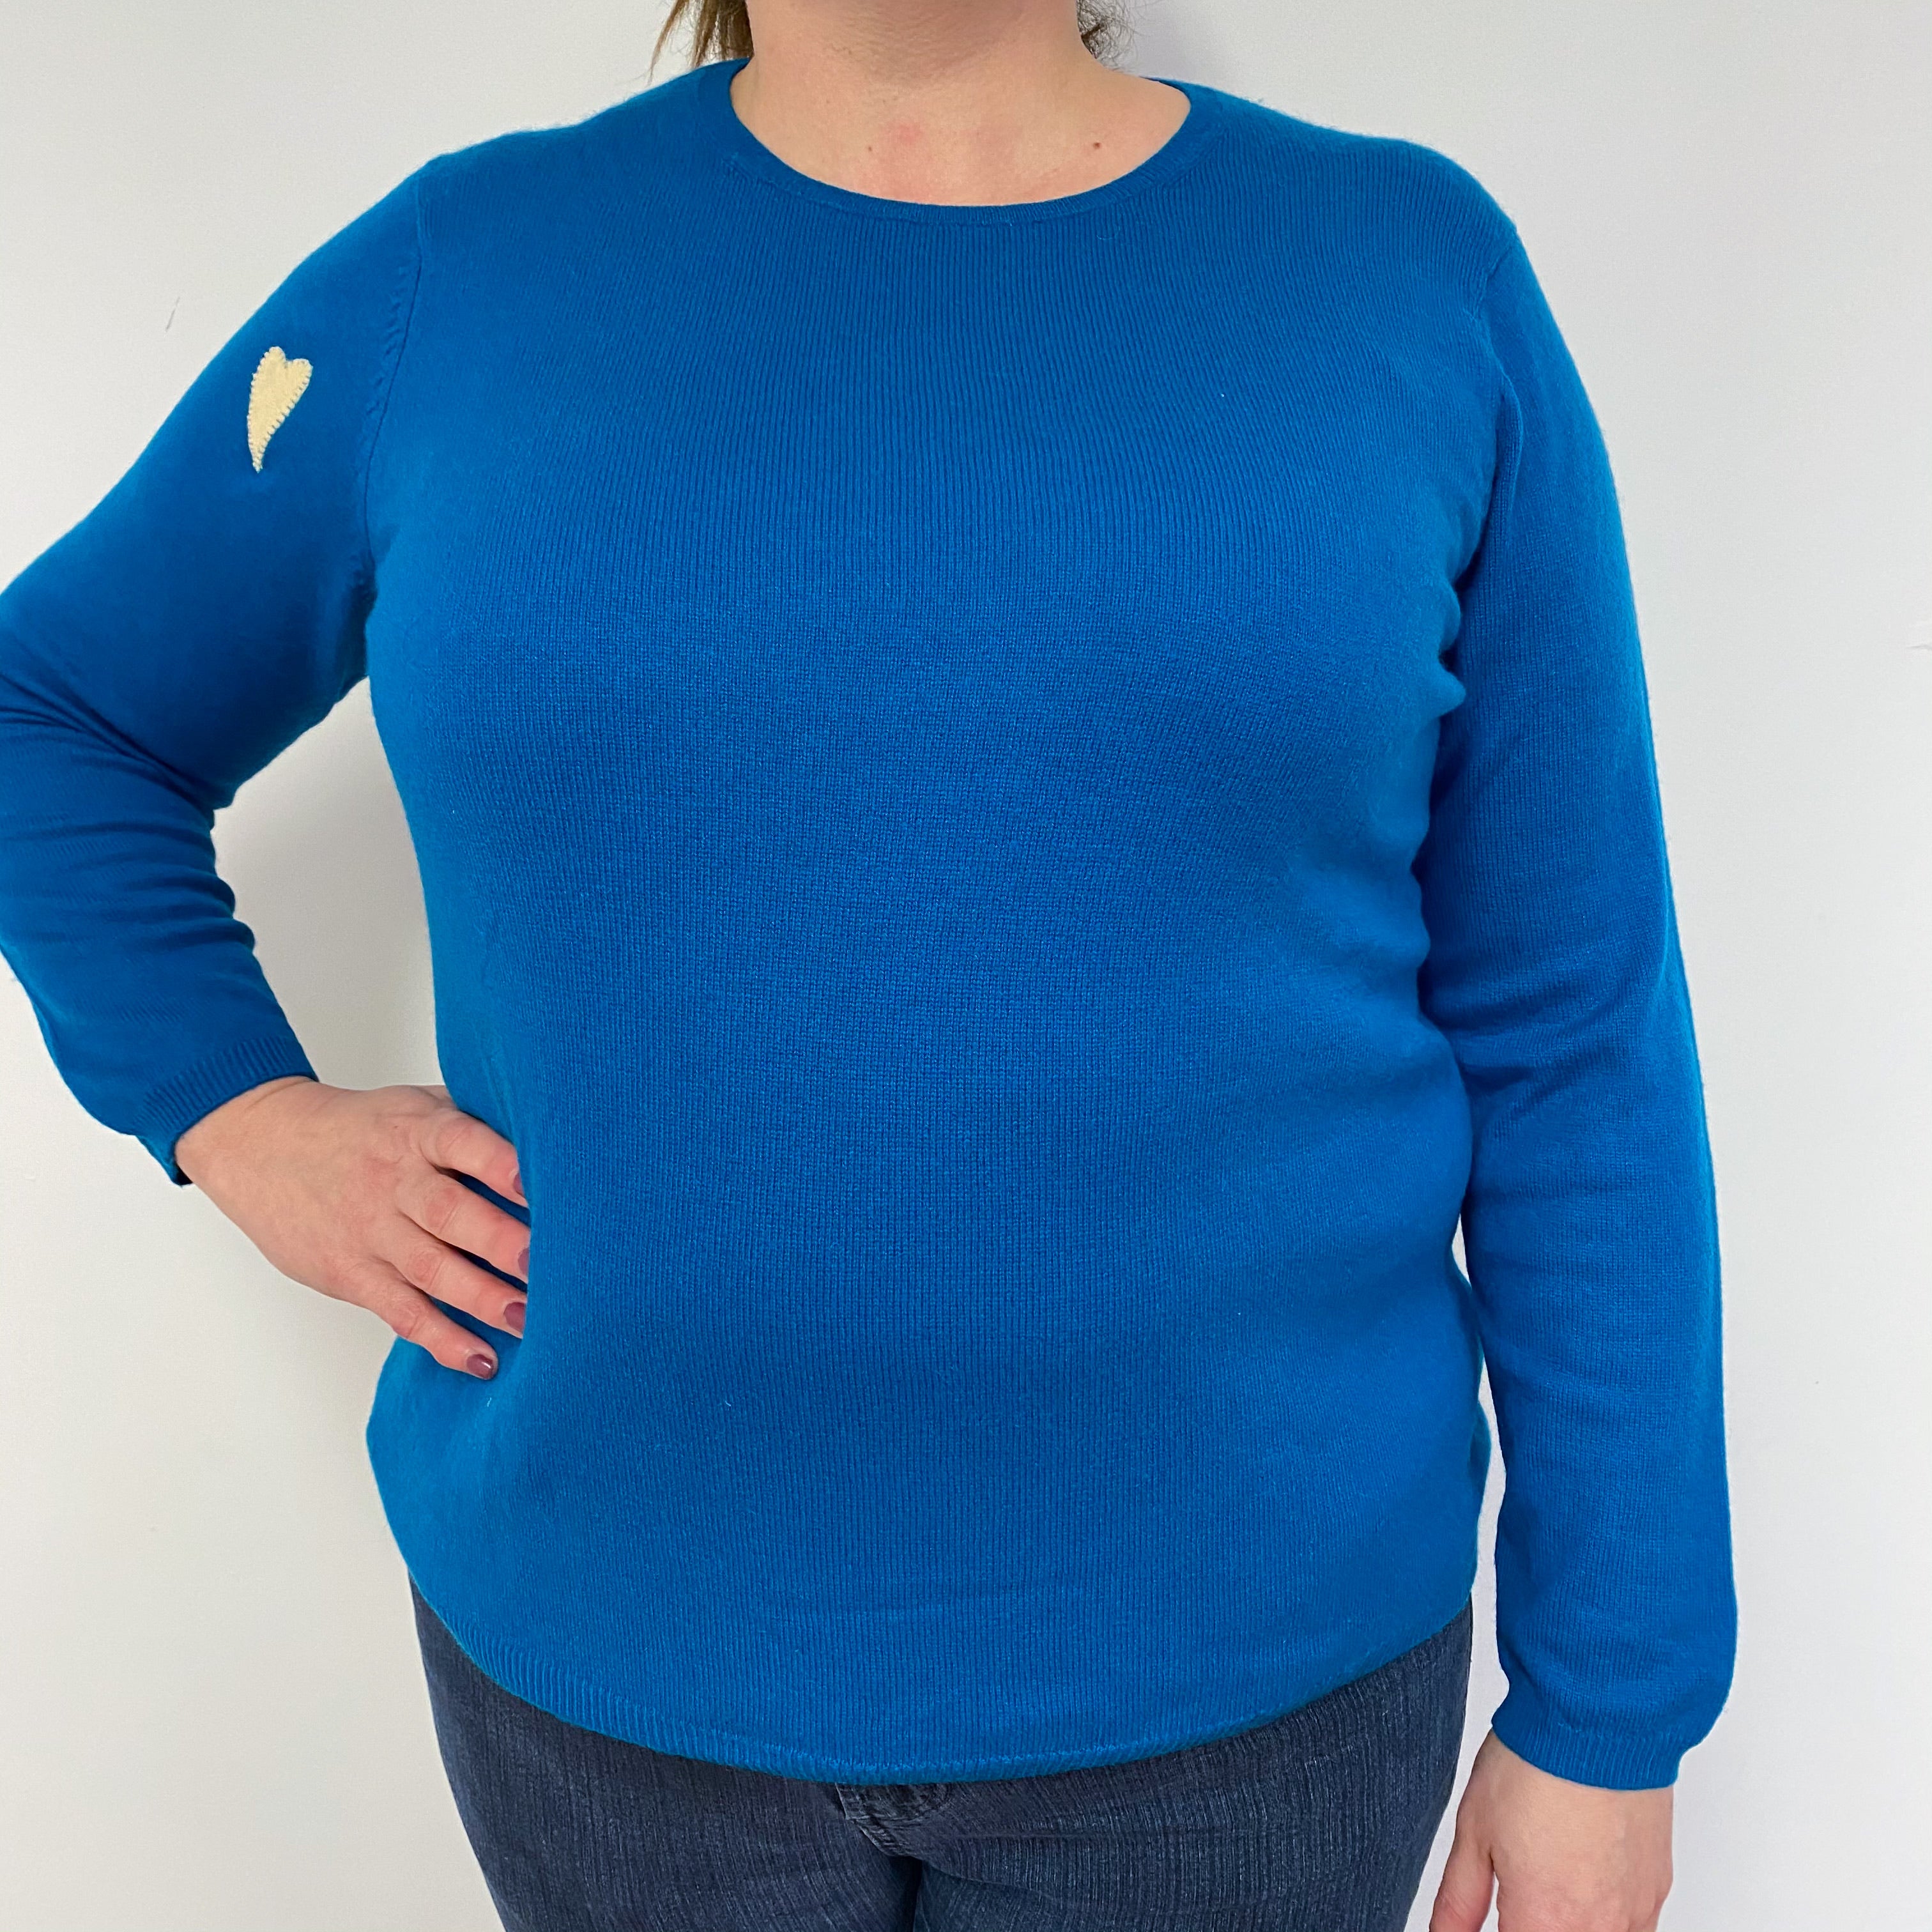 Teal Blue Heart Crew Neck Jumper Extra Large